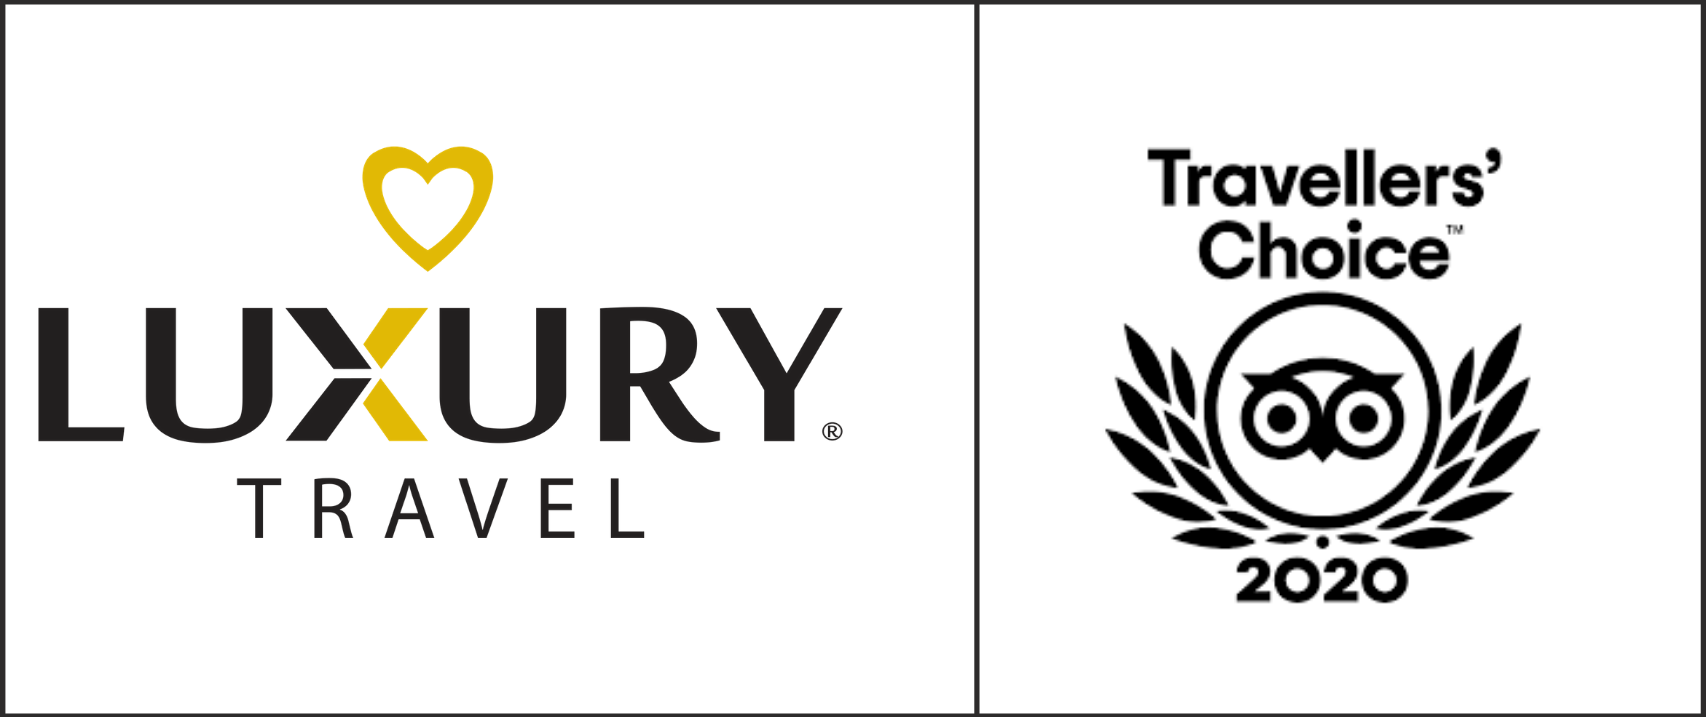 Lux Travel DMC is honored as Travelers’ Choice Best of the Best on Trip